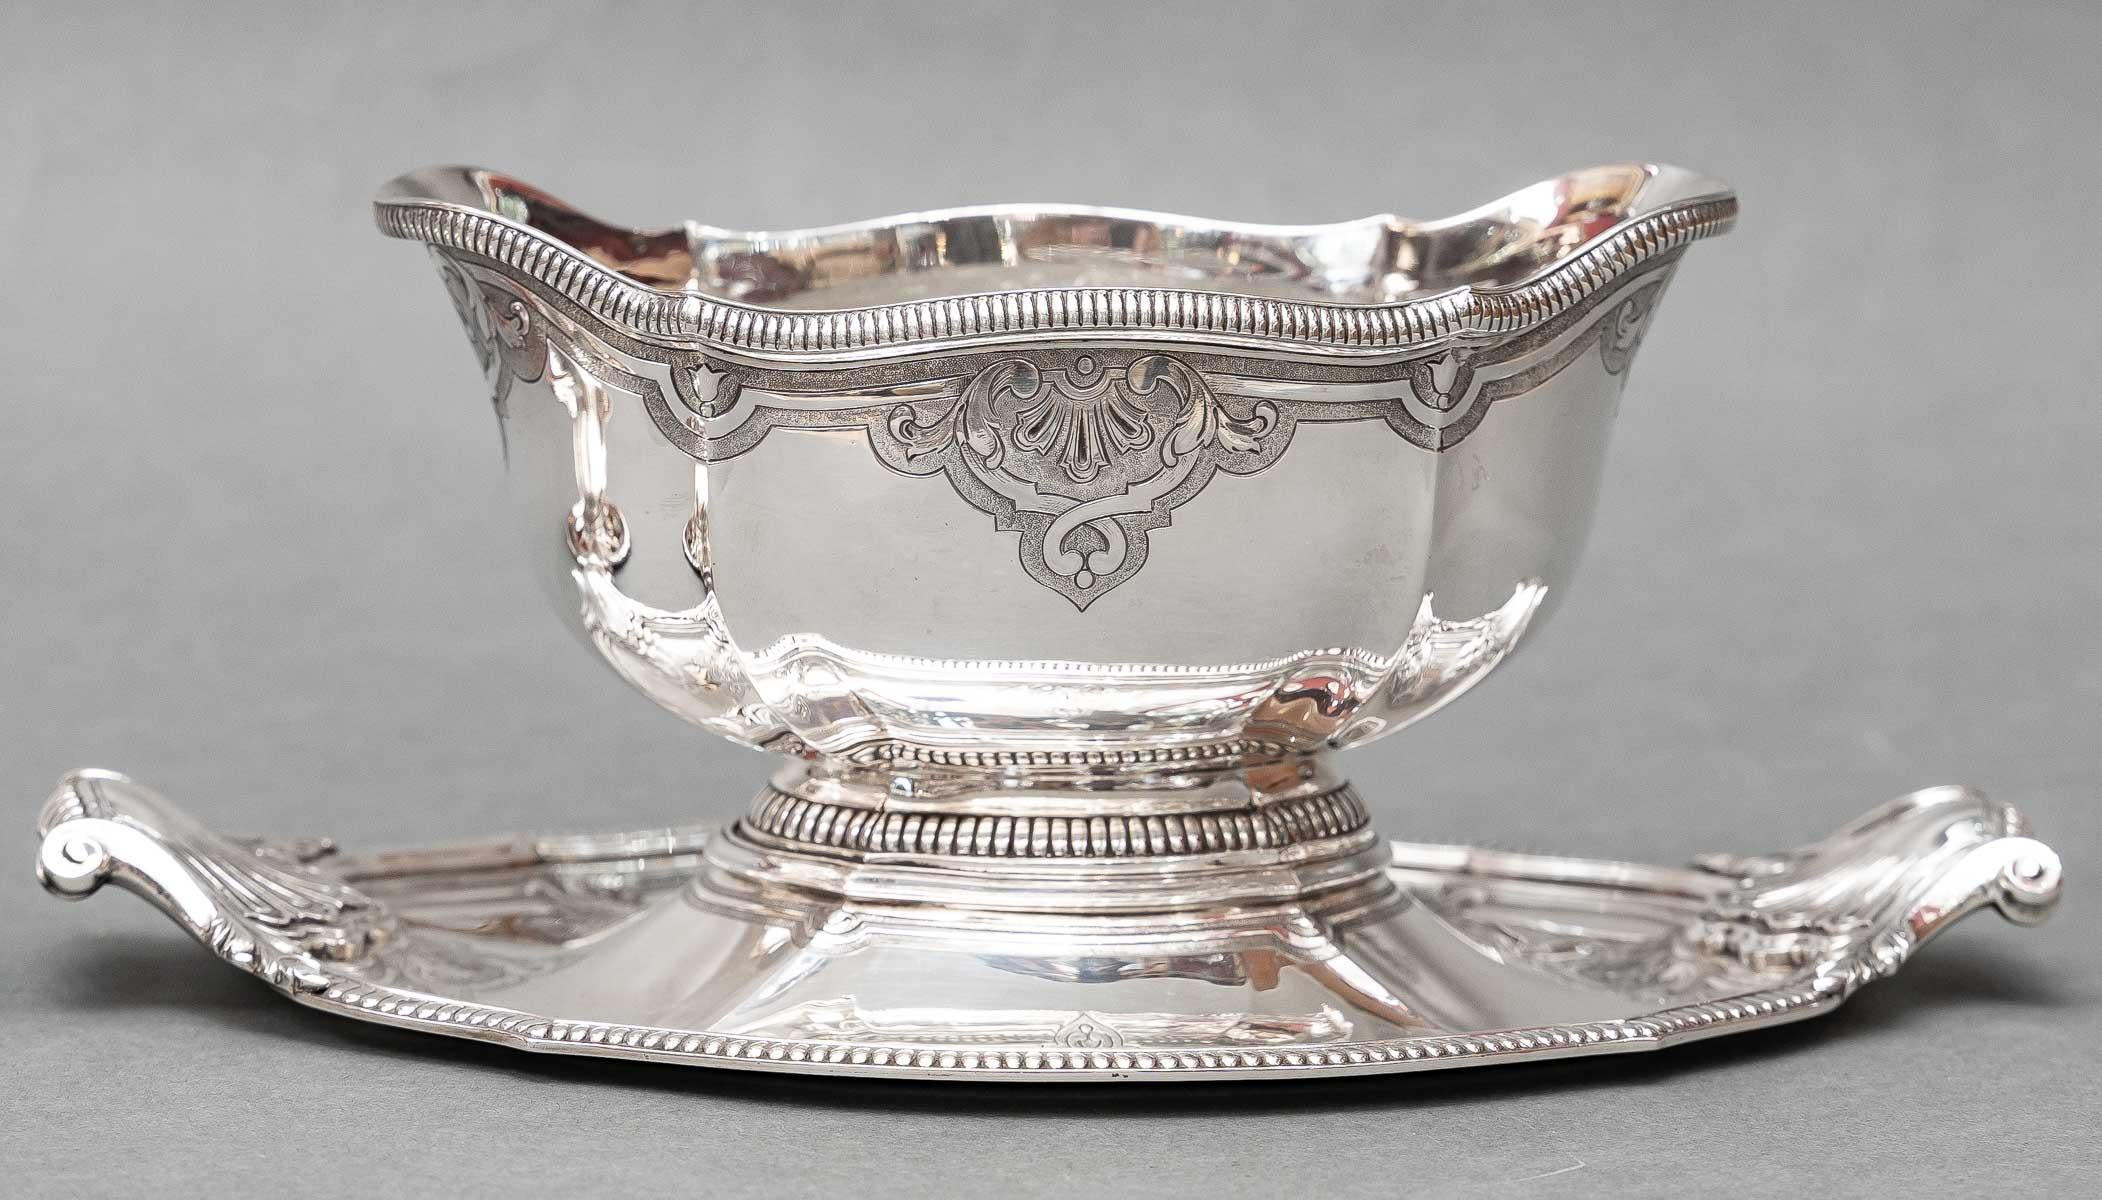 Pair of solid silver sauce boats, oblong in shape, adorned with a frieze of gadroons on the neck, the pinched ribbed body is engraved with a Bérain decoration on a matte background, the adherent tray chiseled with interlacing is flanked by side